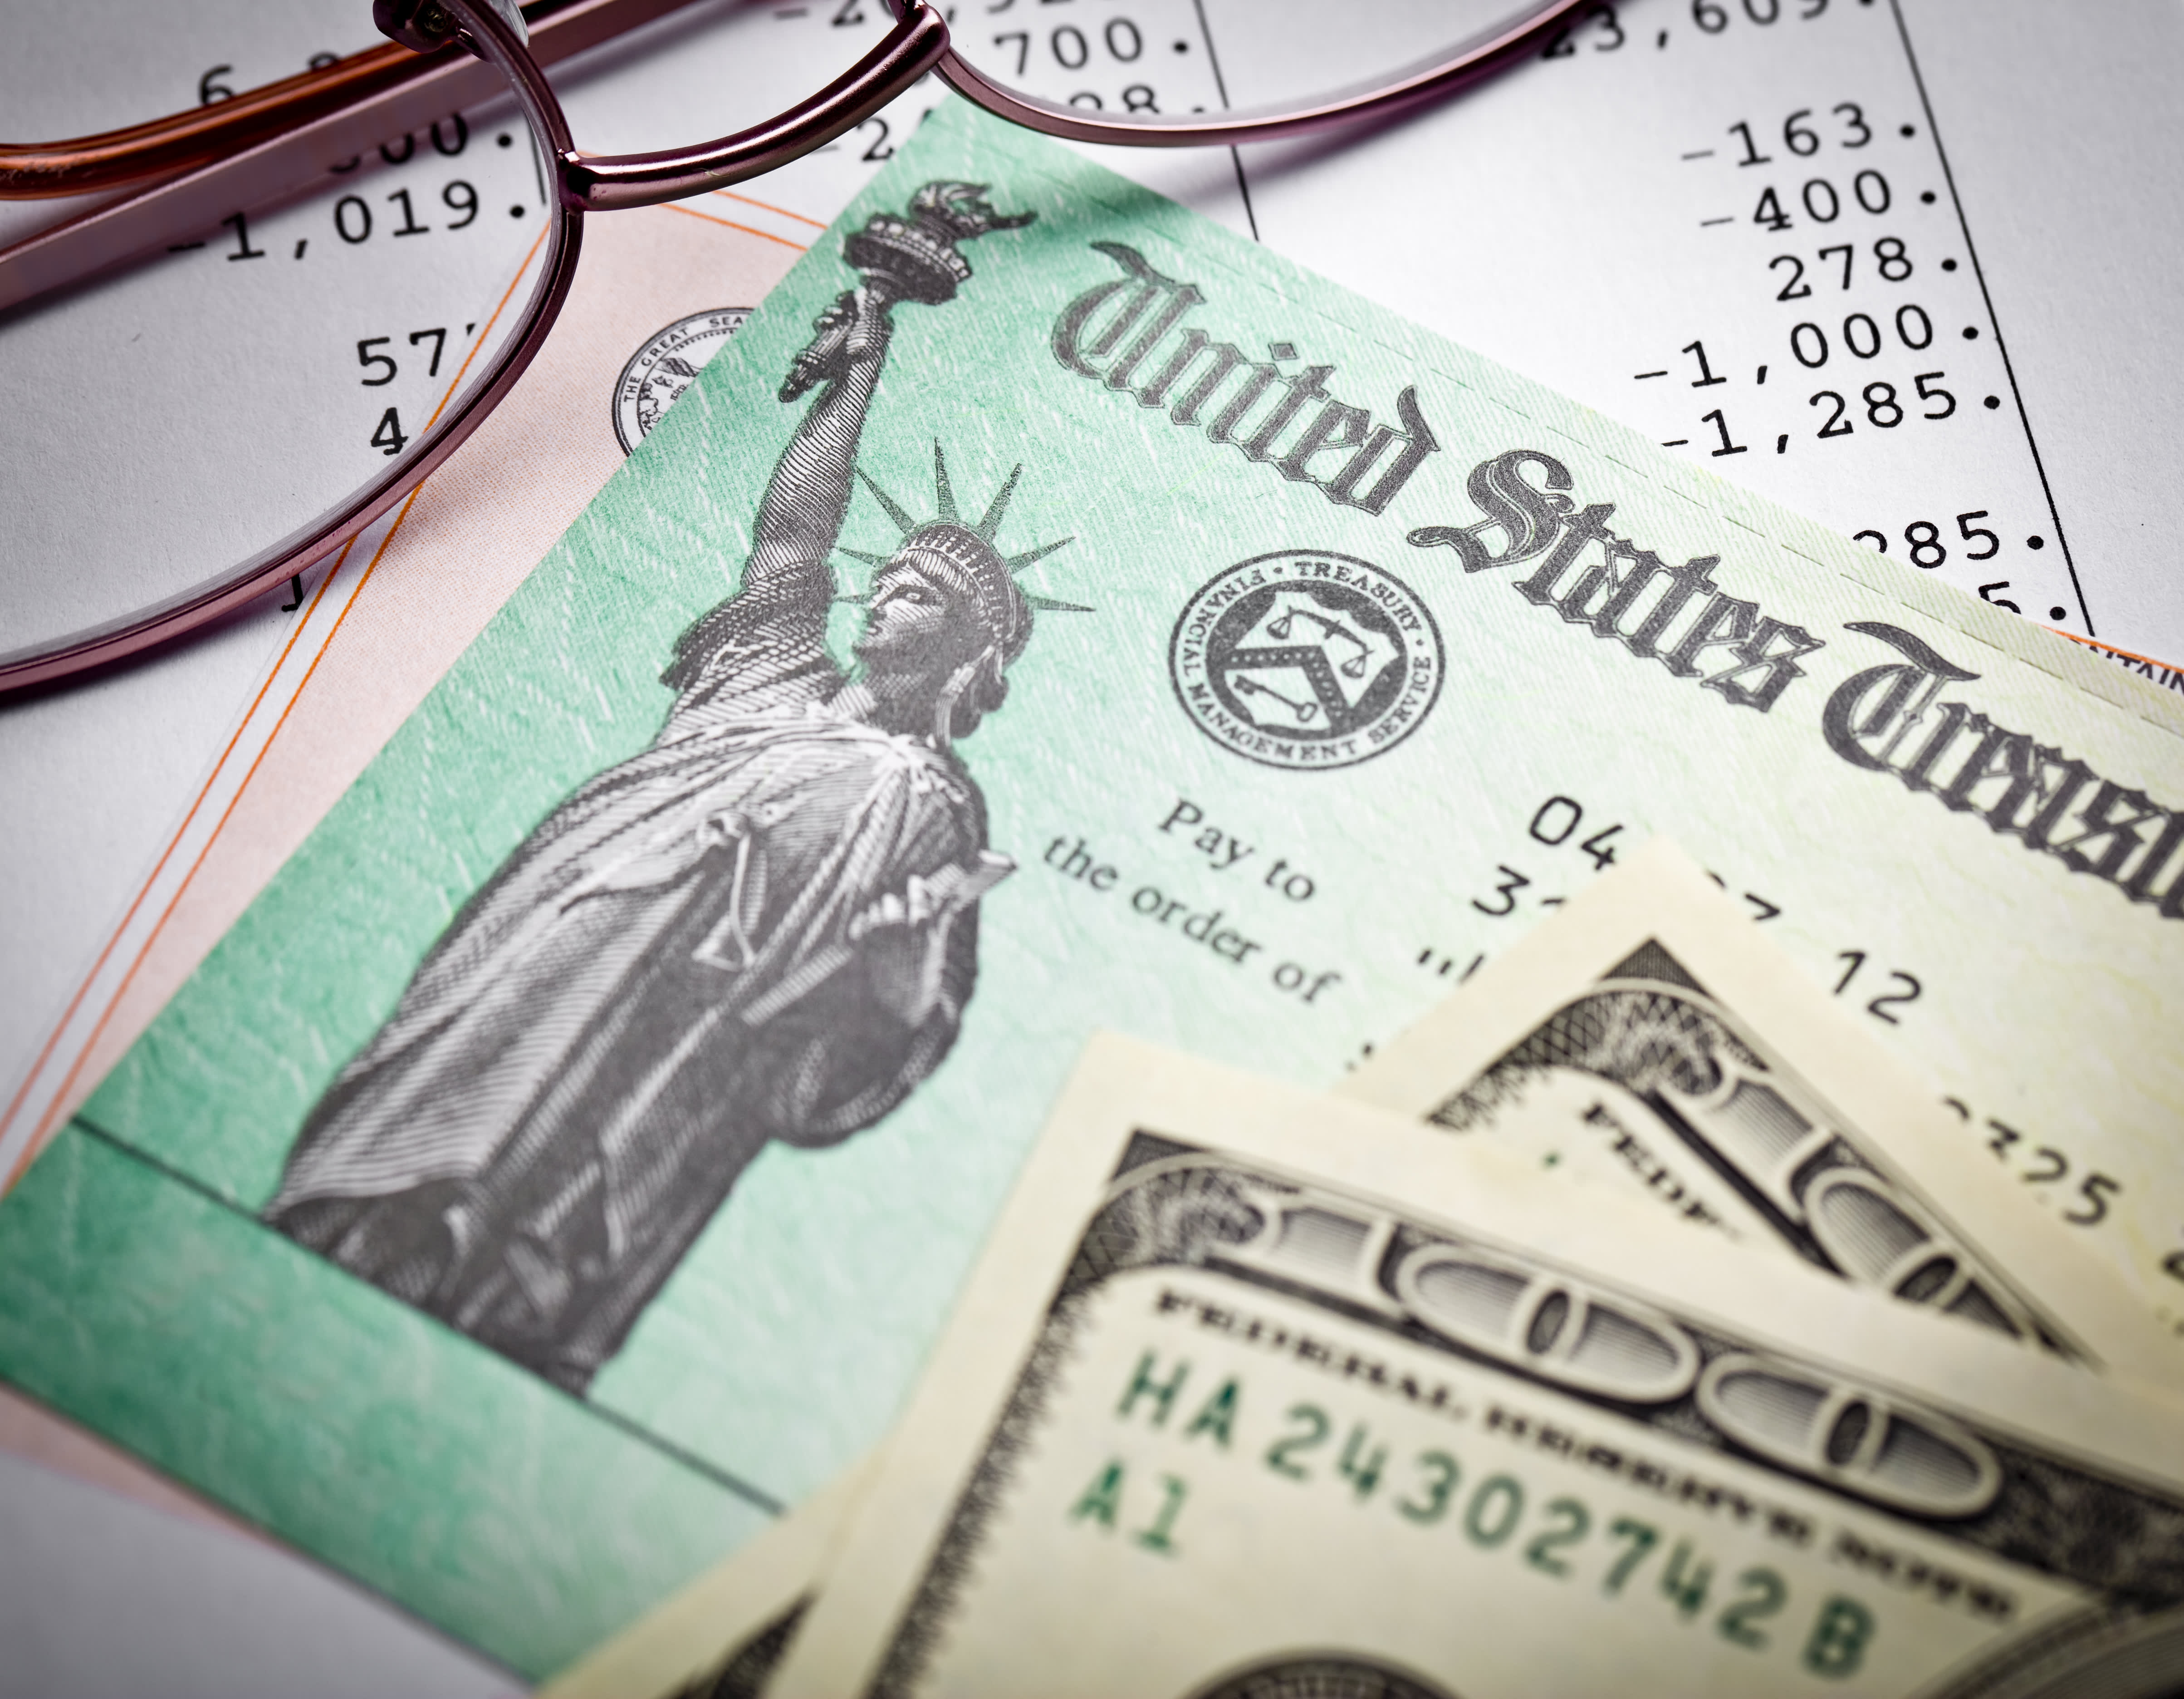 The IRS has issued over 22 million tax refunds. Here’s the average payment